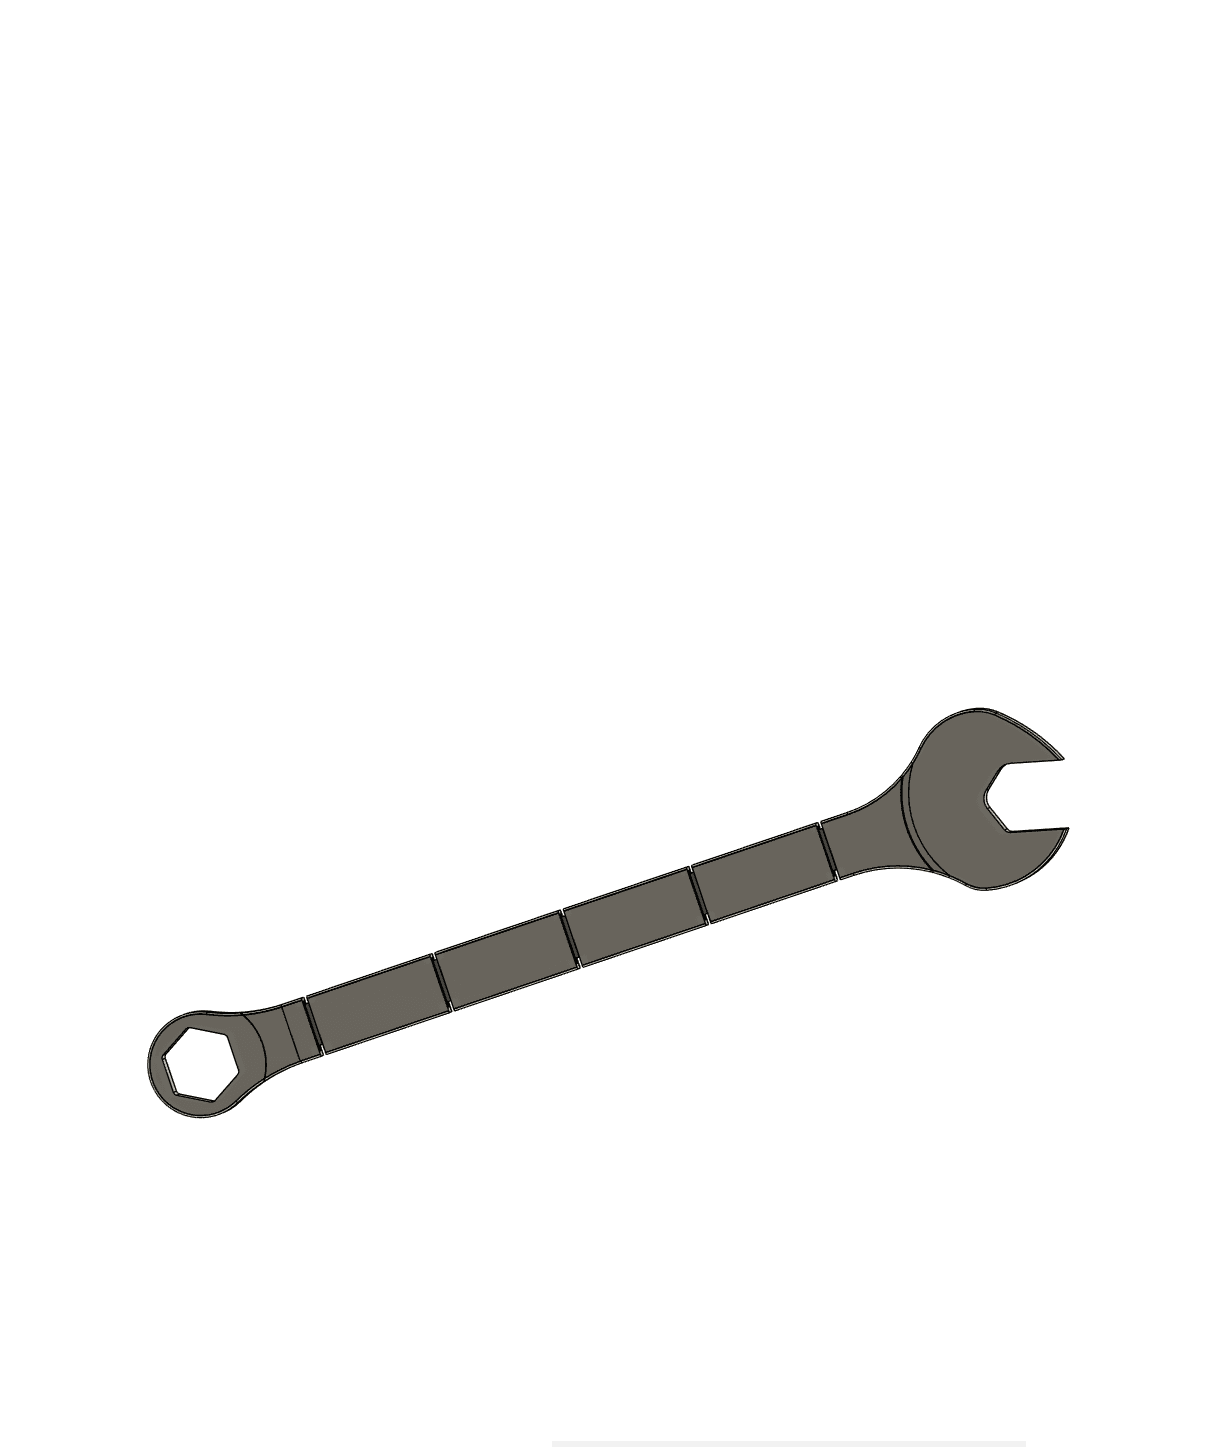 Articulated Wrench.3mf 3d model